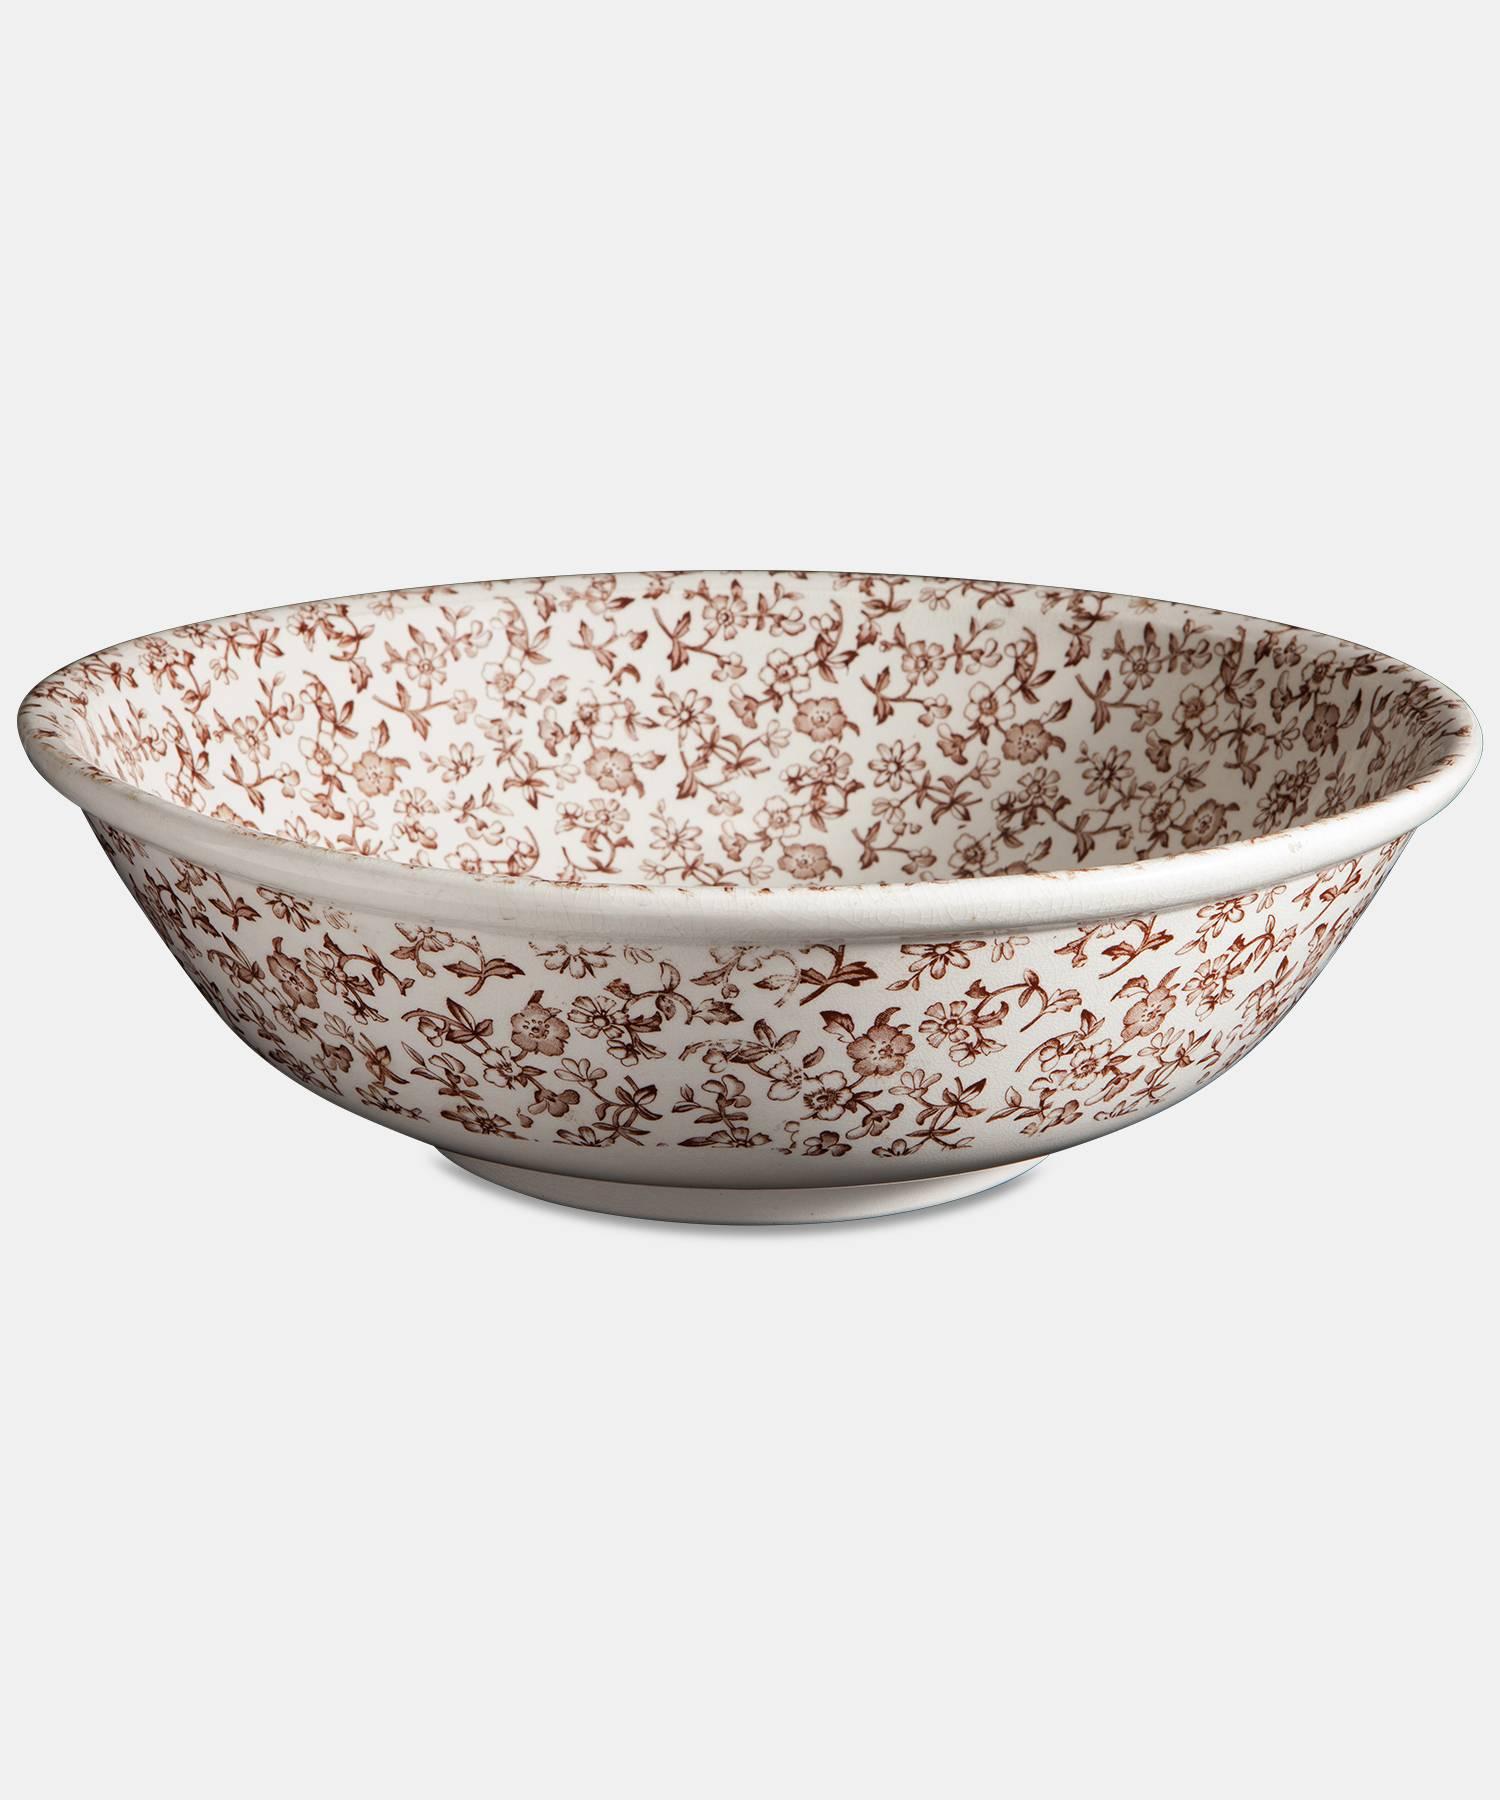 Large bowl with floral pattern.